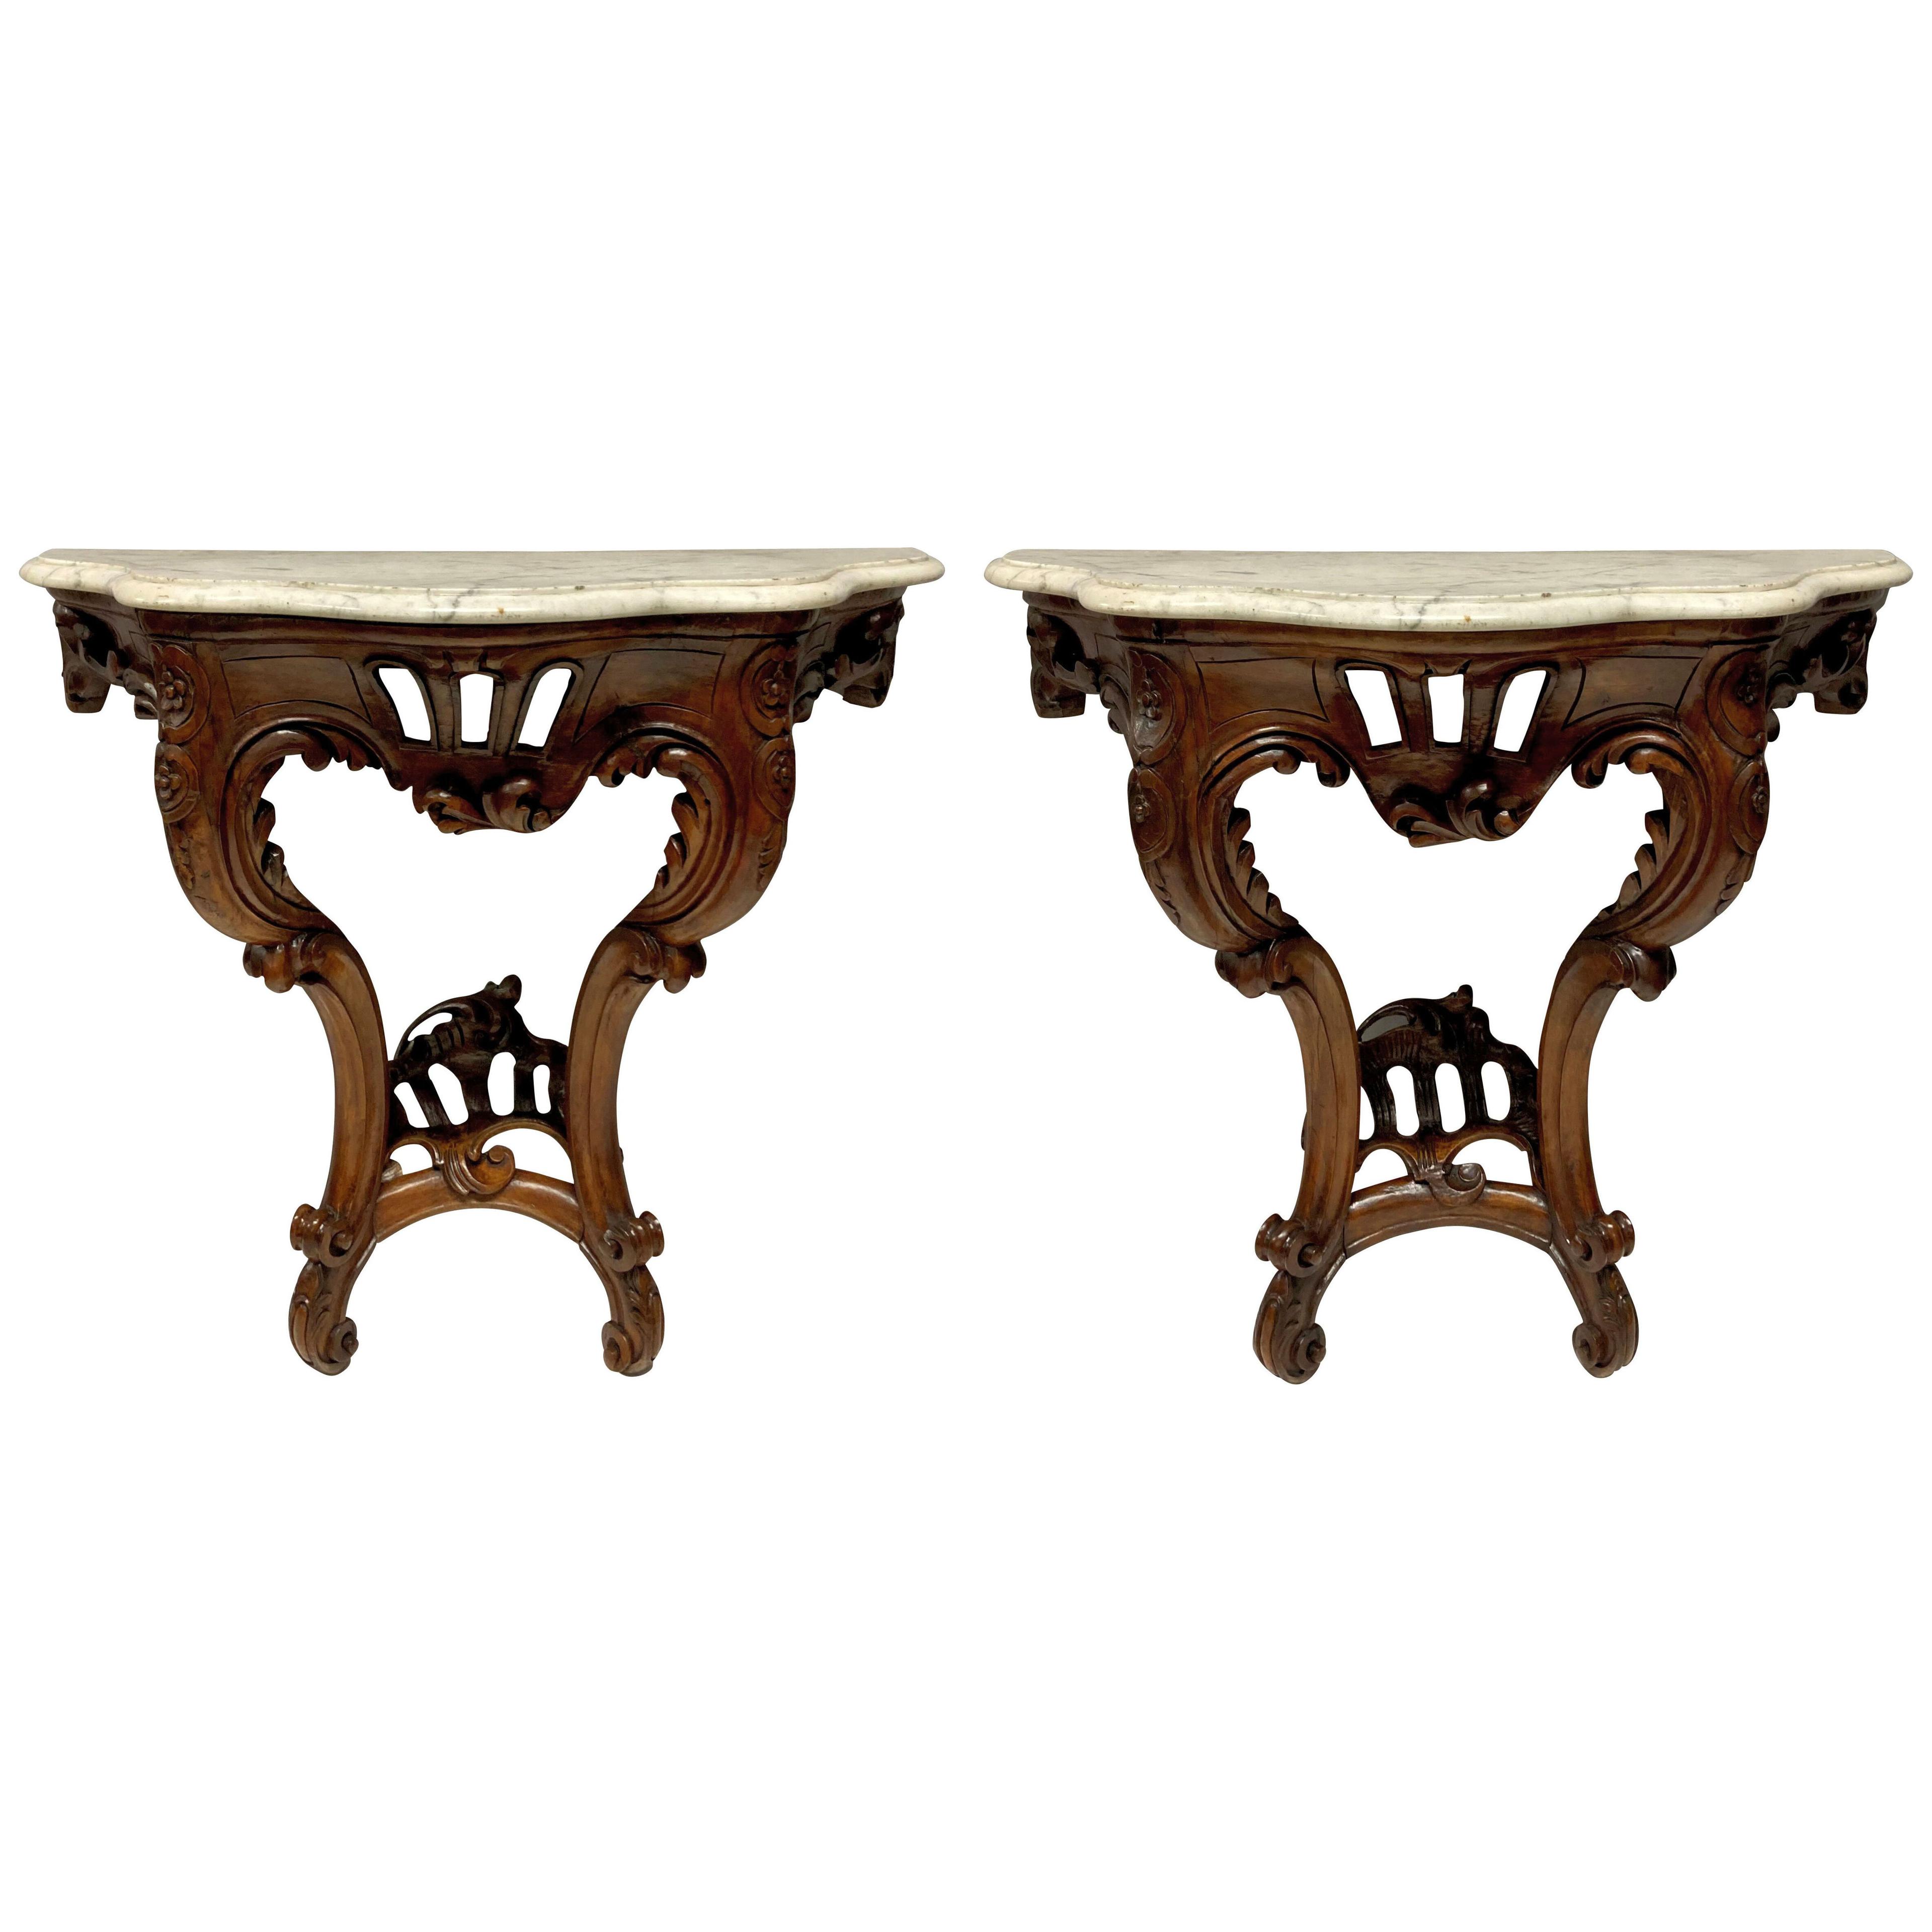 A PAIR OF LOUIS XV STYLE WALNUT & MARBLE CONSOLE TABLES